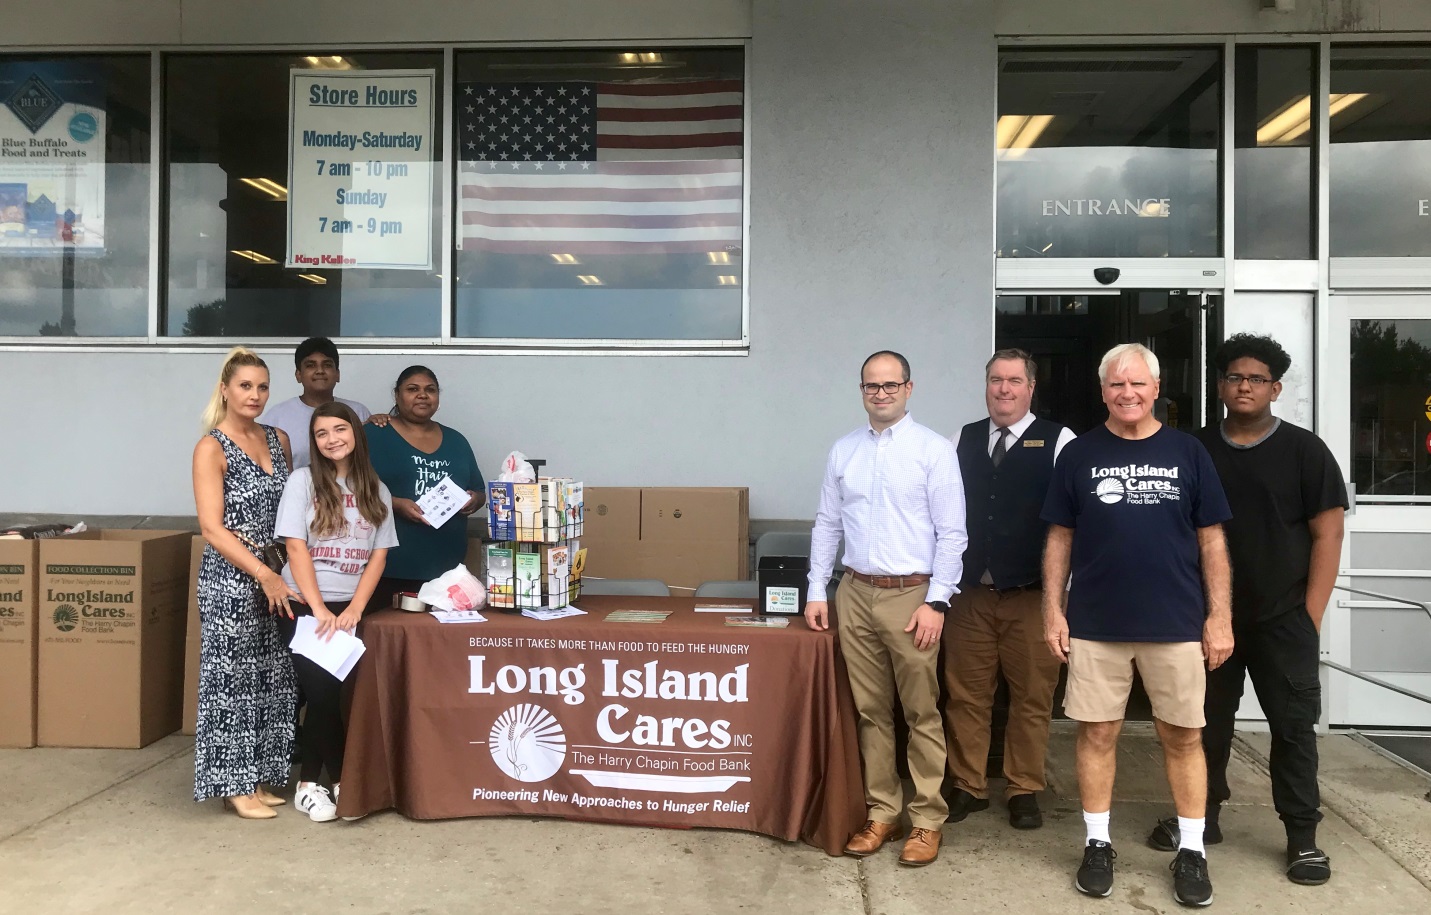 (From left to right) Volunteers Suren Aromogan (back), Meena Armogan (back), Nuria Angos (front), Sofia Carter (front), Assemblyman Ed Ra (R-Franklin Square), Bud Stengren, King Kullen store manager,